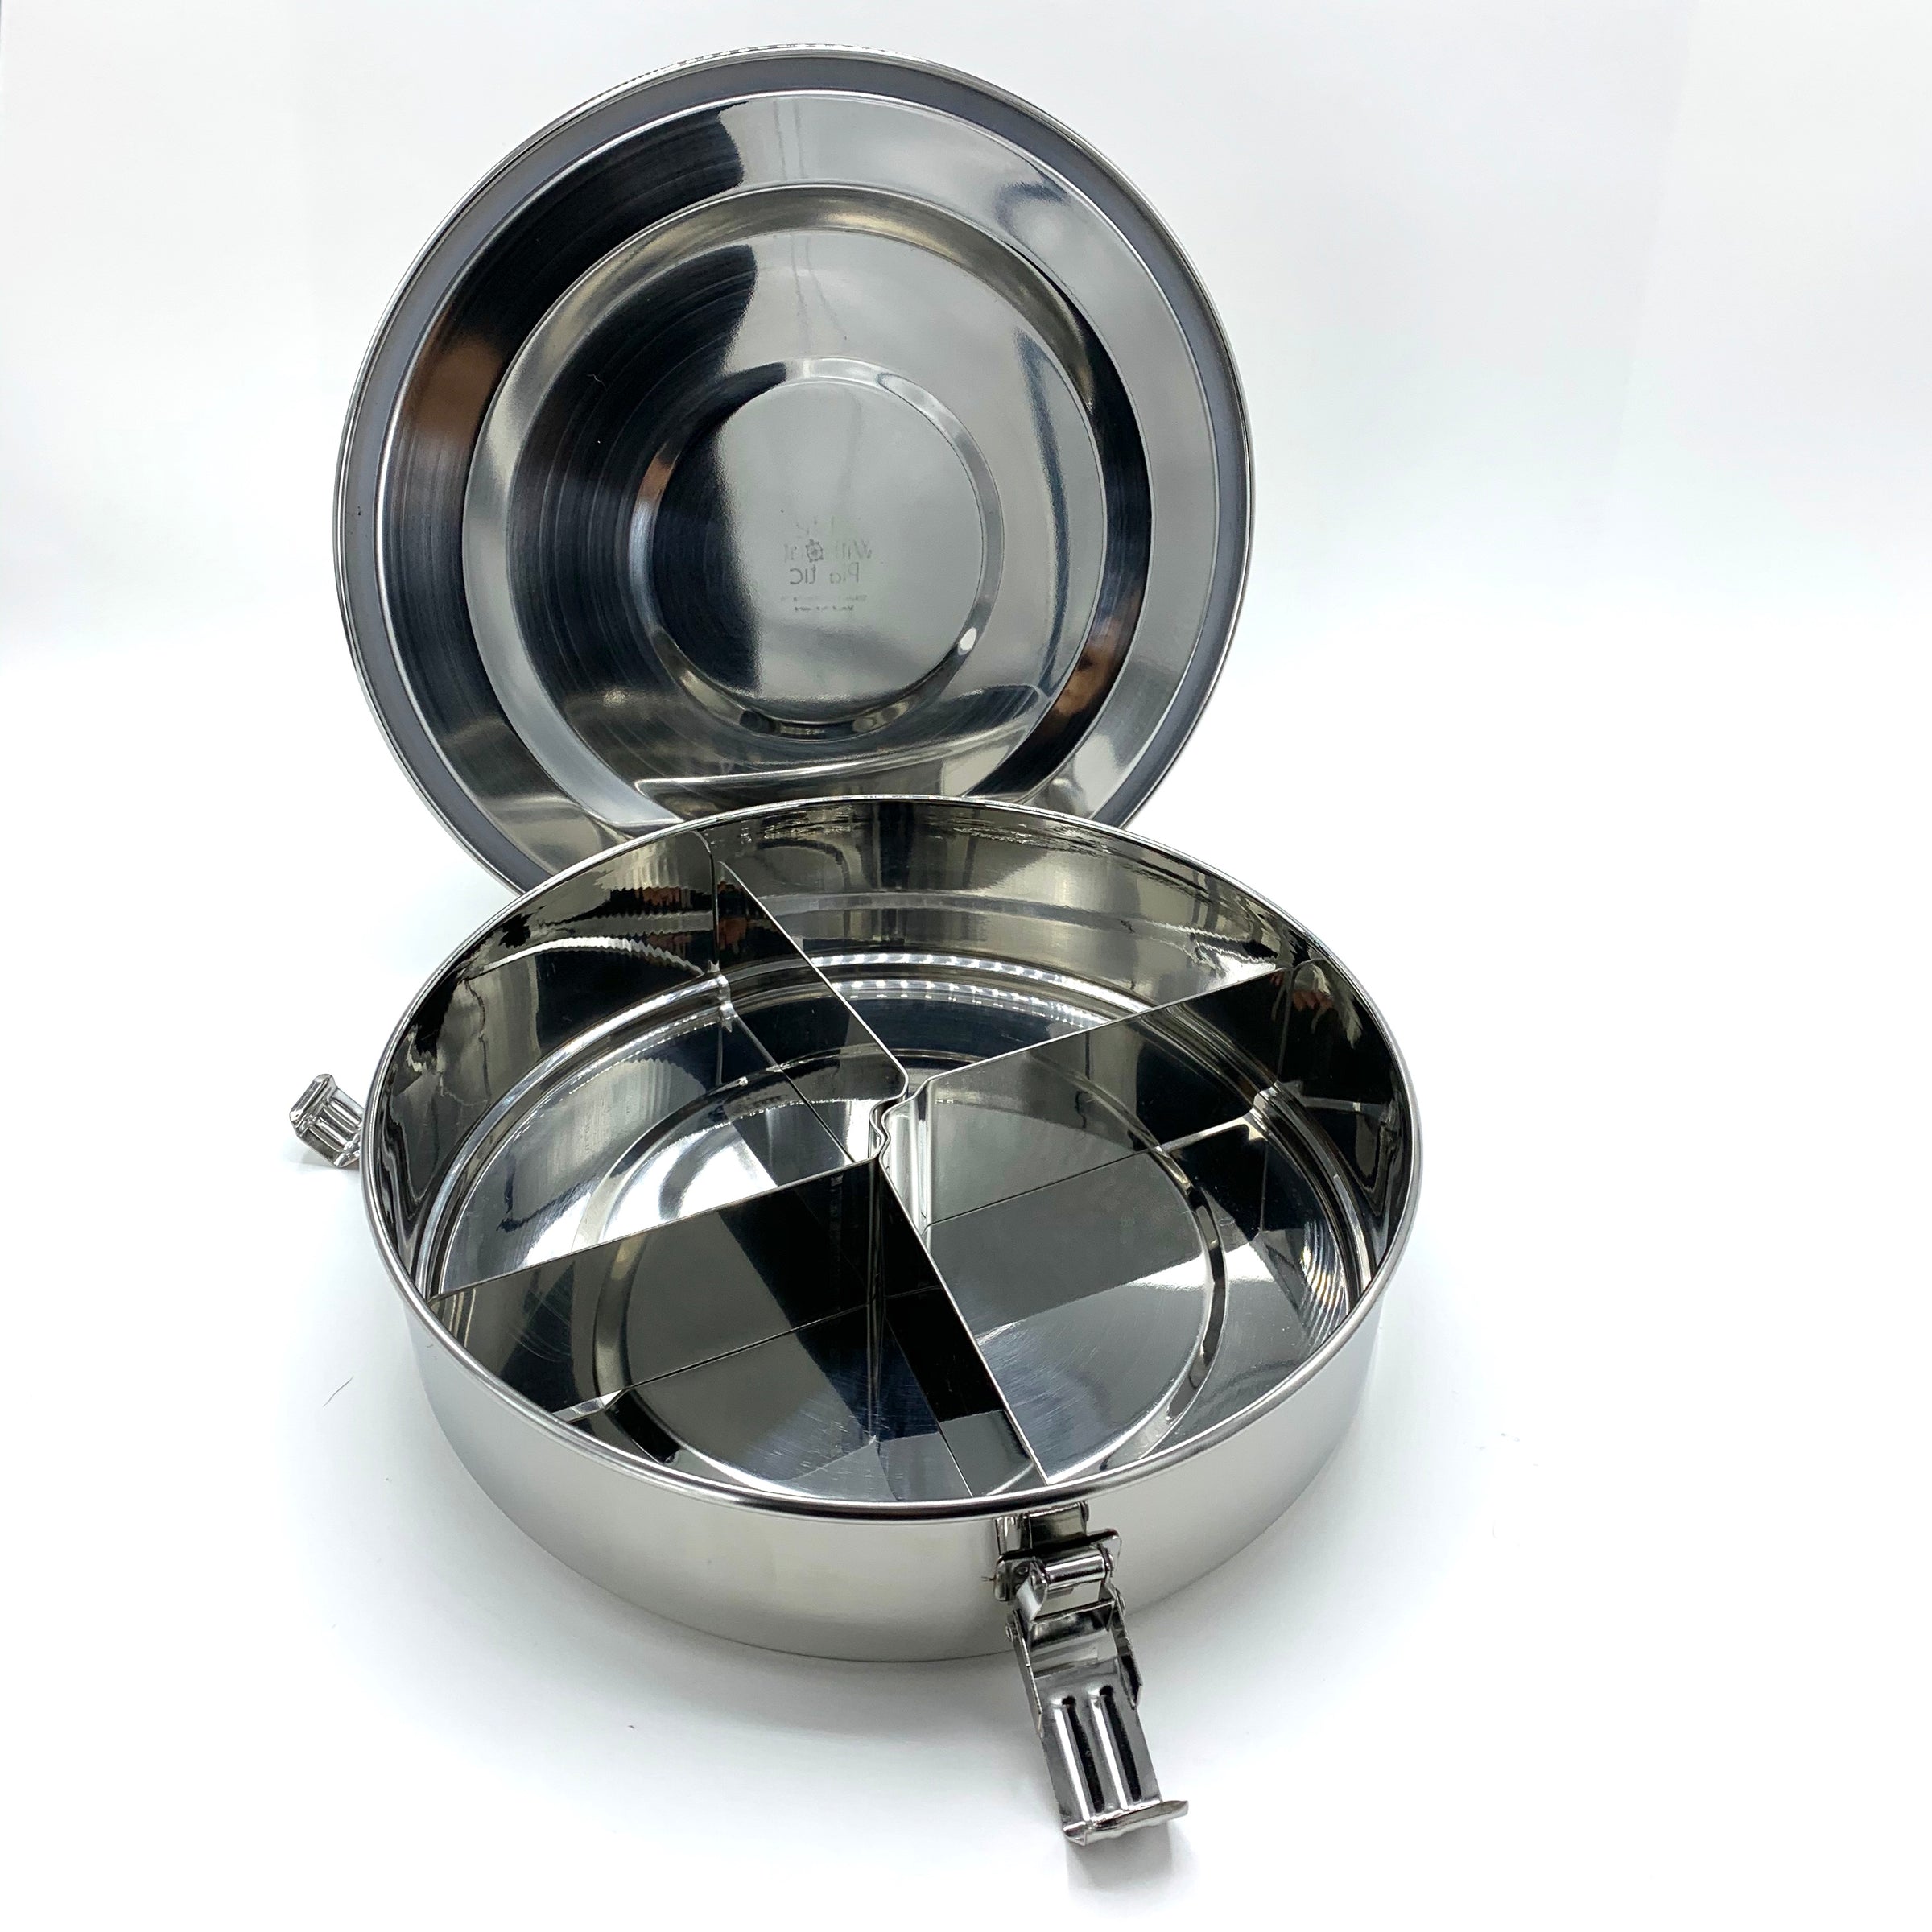 Stainless Steel Airtight Food Storage Container - Med Round with